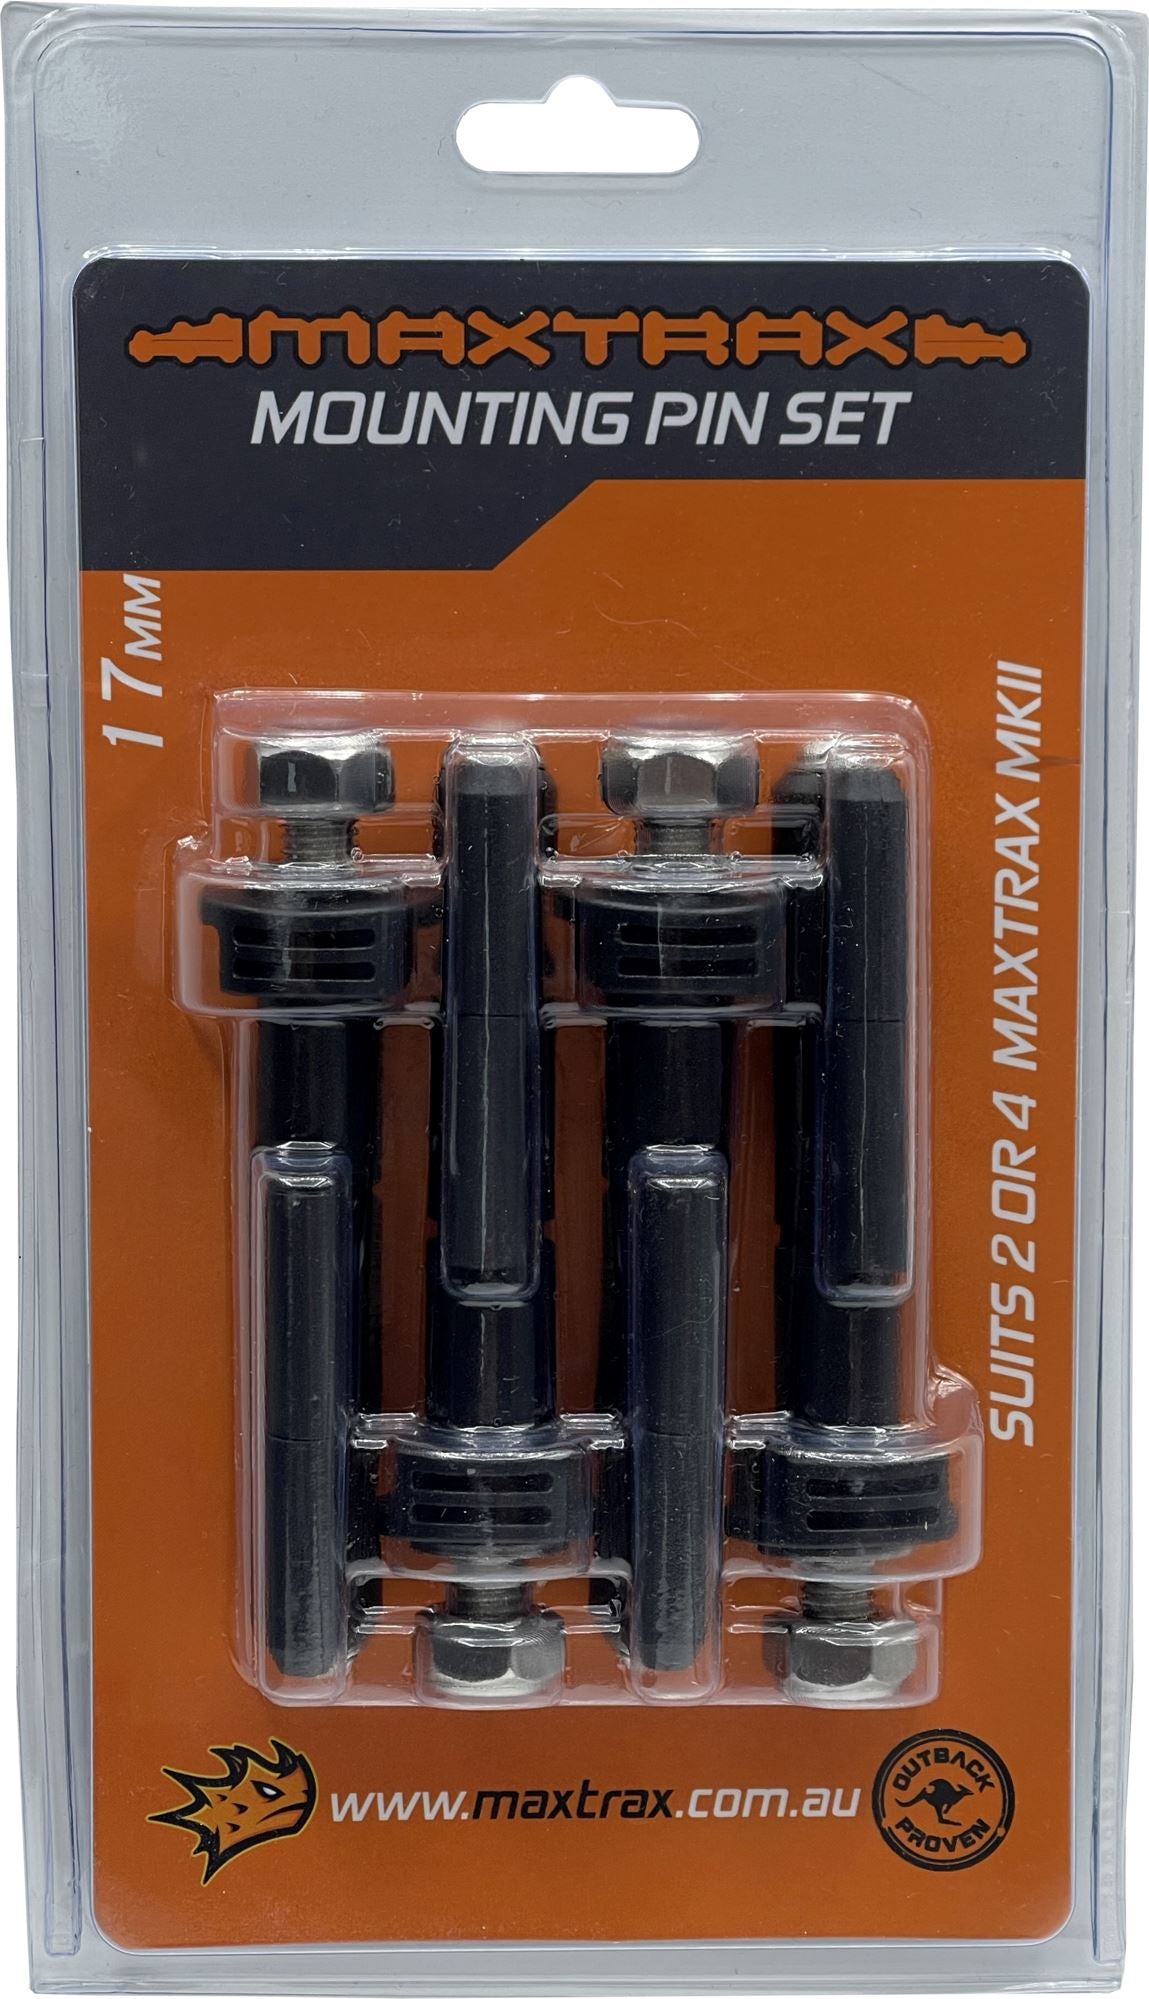 MAXTRAX MKII Mounting Pins (For MKII, LITE, or Mini) 17mm Mounting Gear MAXTRAX- Overland Kitted